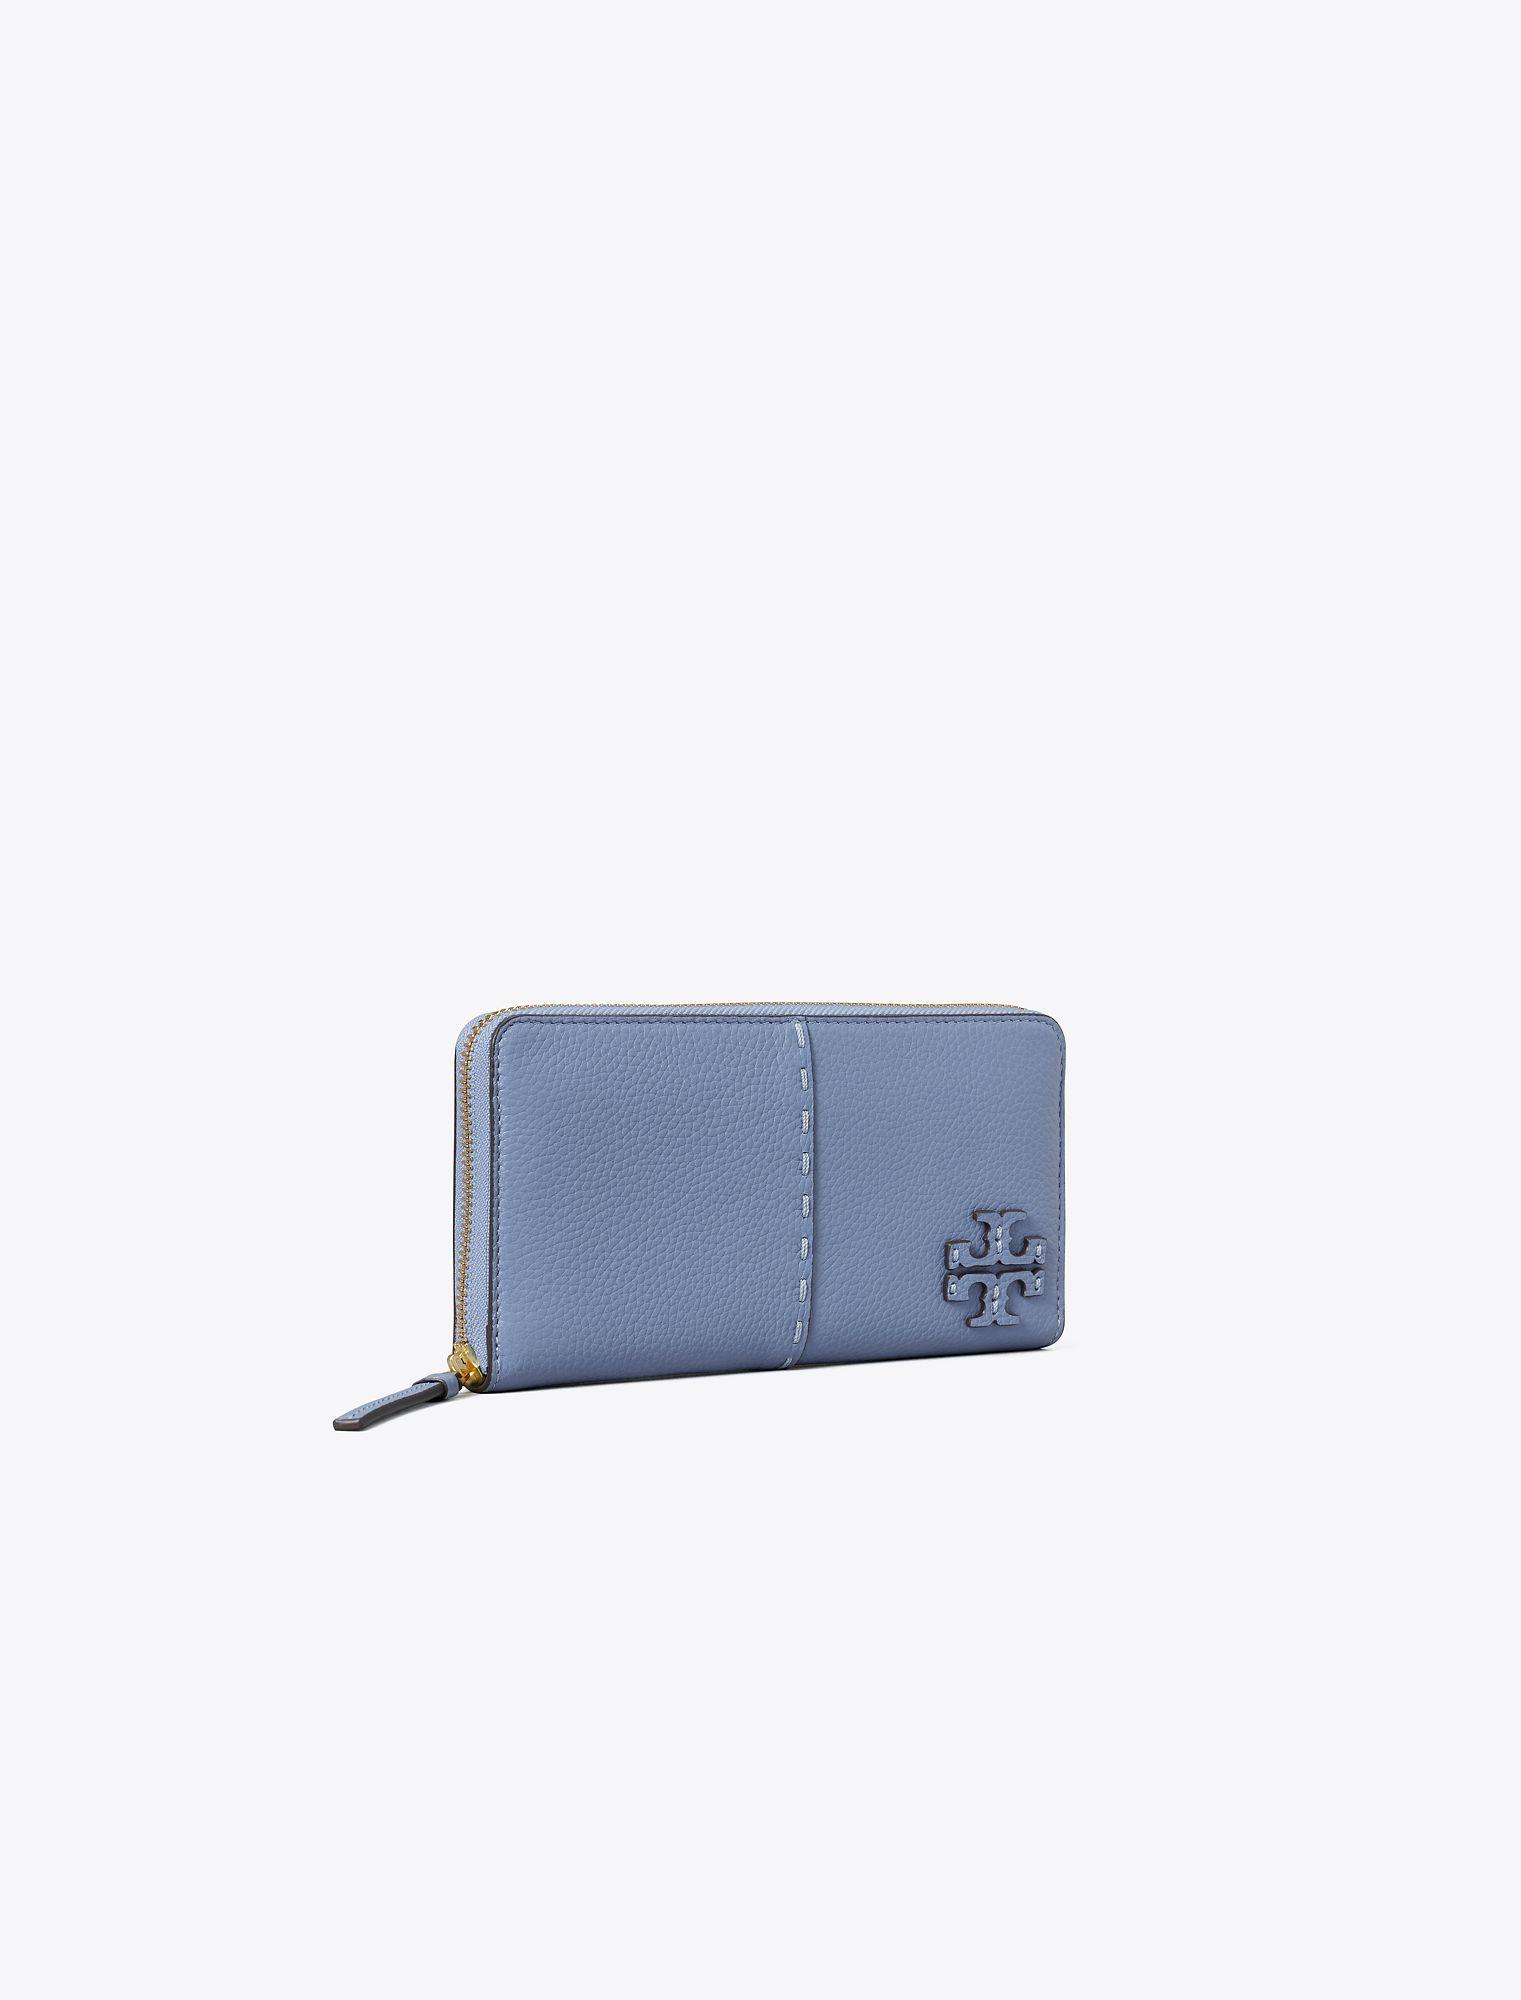 Tory Burch Mcgraw Zip Continental Wallet in Blue | Lyst